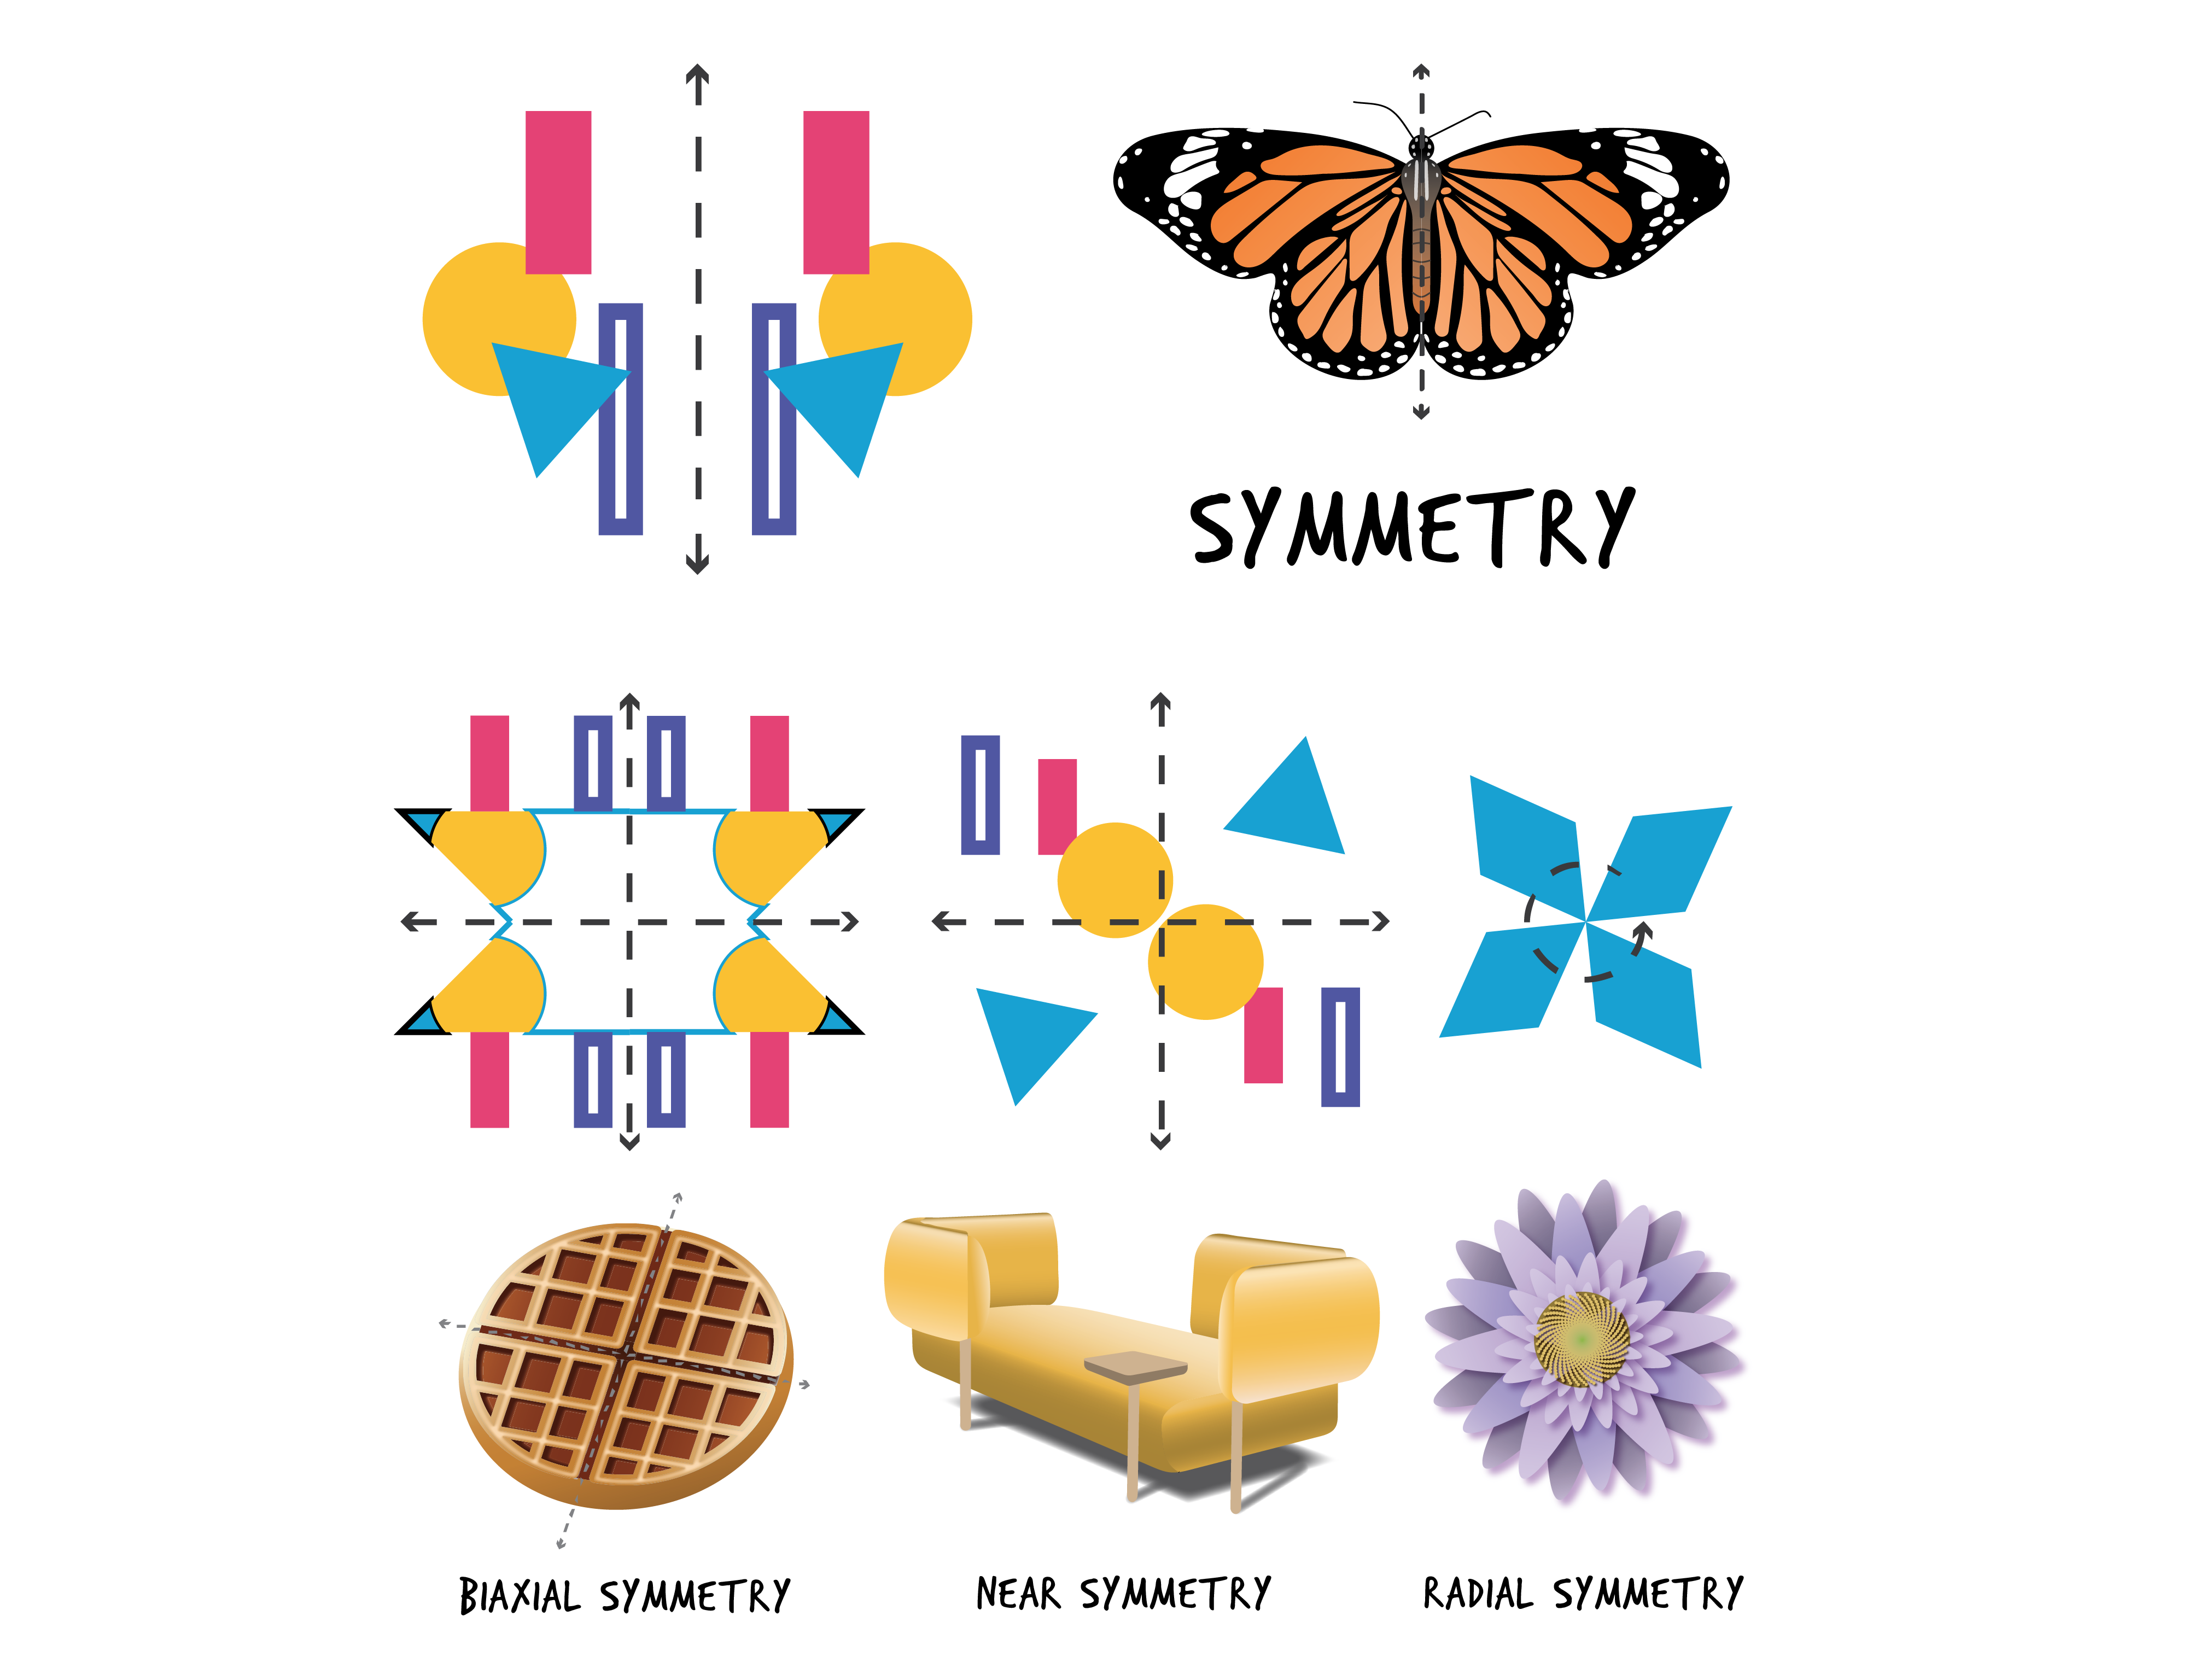 On the top row, two images illustrate symmetry: a geometric image with mirrored sides, and a butterfly. On the second row, there are 3 columns that illustrate 3 different types of symmetry. In the first column on the left, two images illustrate biaxial symmetry: 1 geometric design with 4 similar quadrants and a waflle with 4 similar quadrants. In the second column, two images illustrate near symmetry: a geometric image with diagonally similar quadrants and a sofa with diagonally similar quadrants. In the fourth column, two images illustrate radial symmetry: a geometric image with 4 radiating shapes and a flower with petals radiating around a central point.